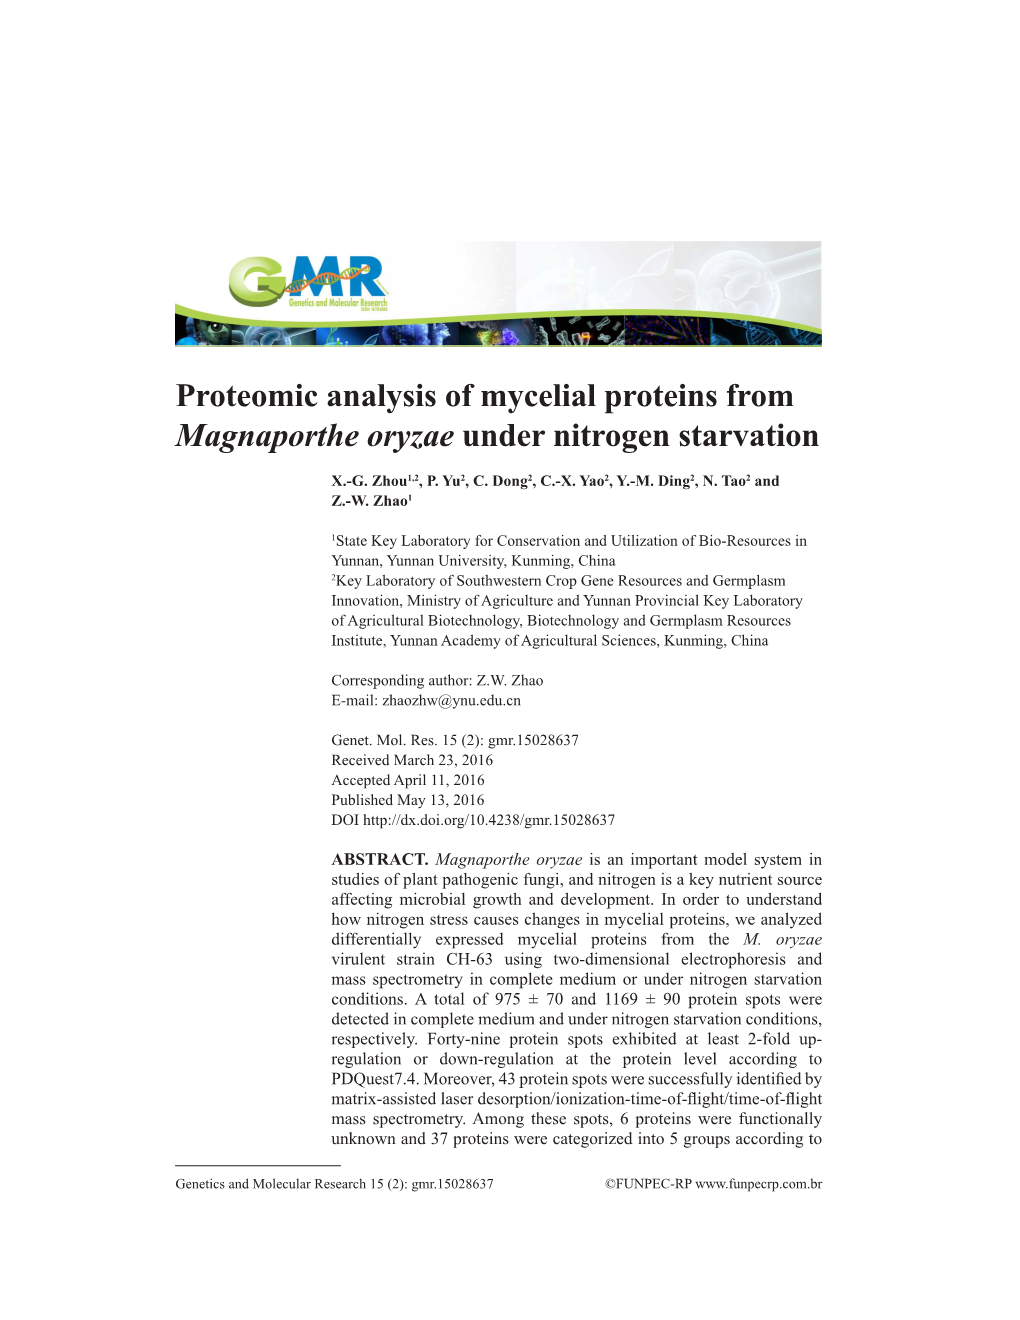 Proteomic Analysis of Mycelial Proteins from Magnaporthe Oryzae Under Nitrogen Starvation